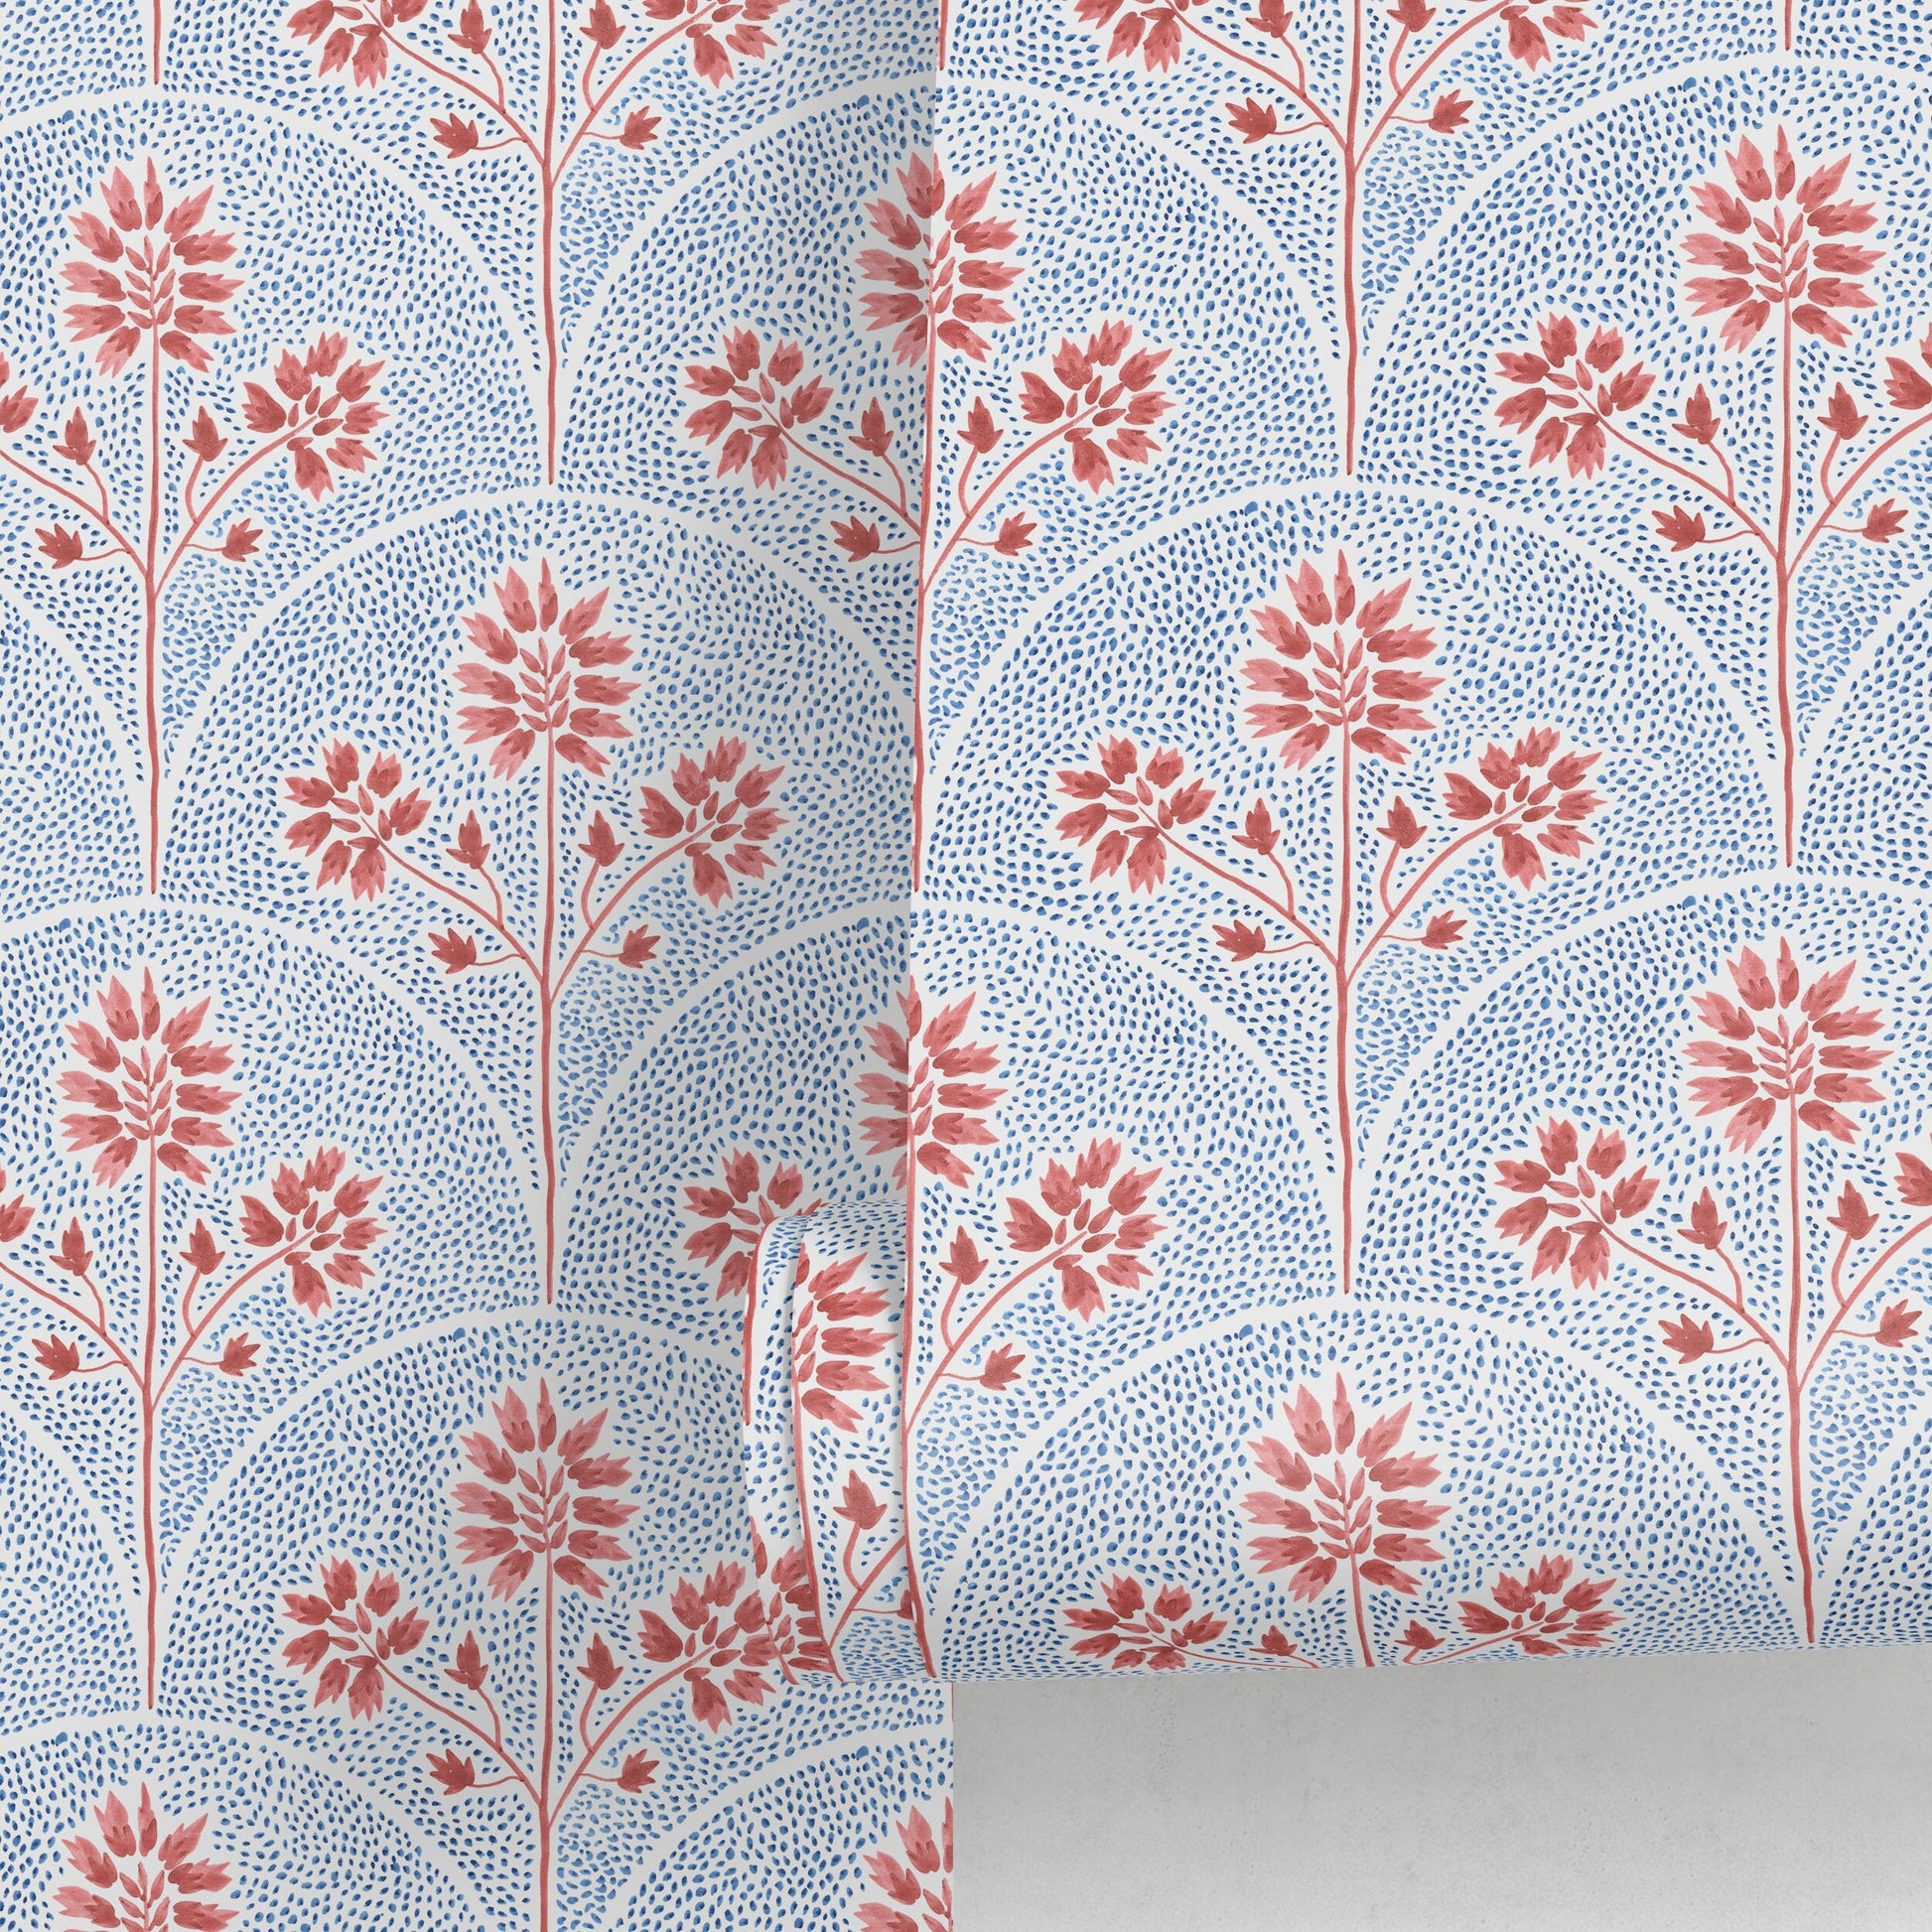 Pink and Blue Floral Wallpaper / Peel and Stick Wallpaper Removable Wallpaper Home Decor Wall Art Wall Decor Room Decor - C779